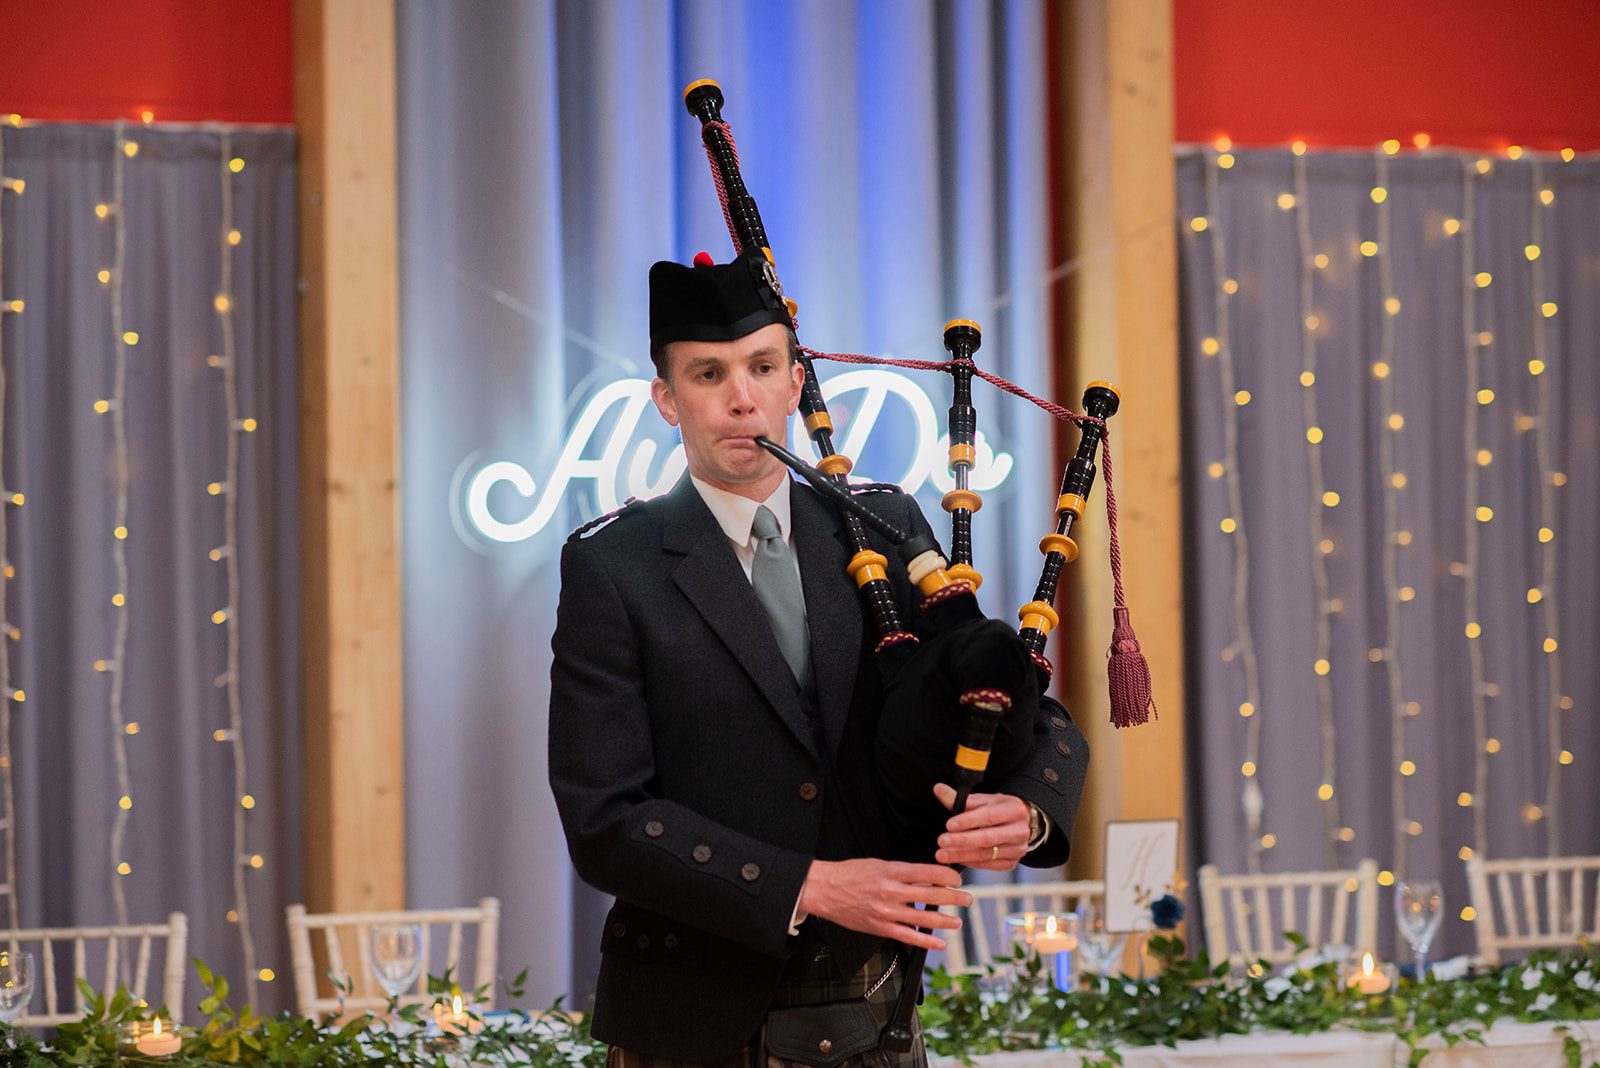 Alistair Brown - Ayrshire Bagpiper playing the pipes in Arrochar at styled Wedding